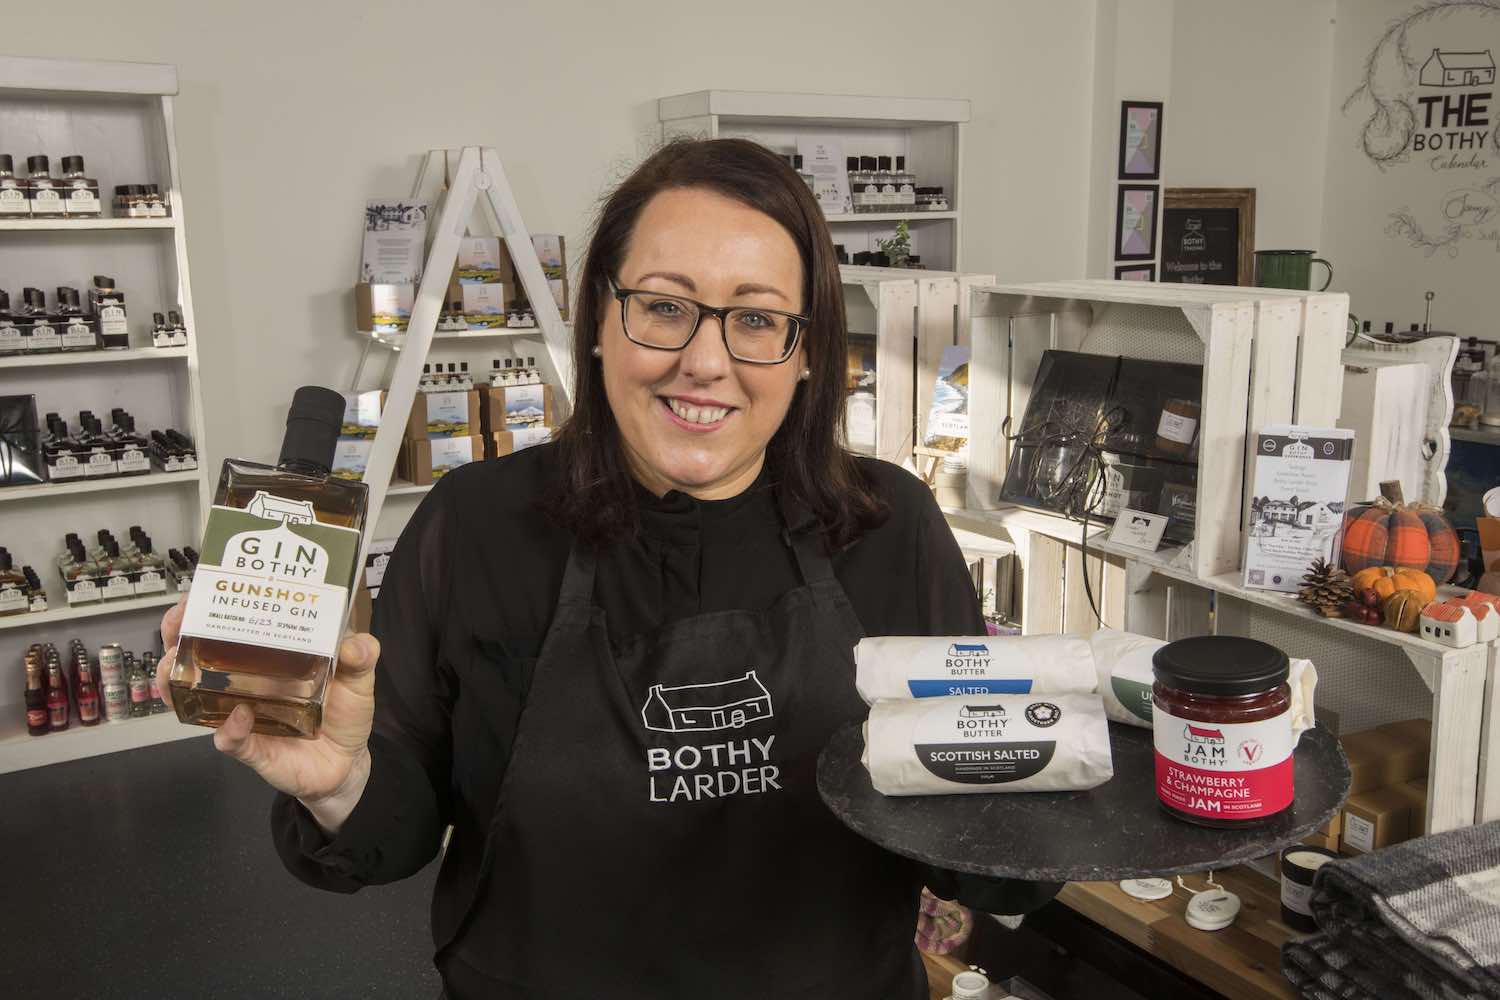 Gin Bothy stirs Tradition with launch of artisan Bothy Butter in Angus